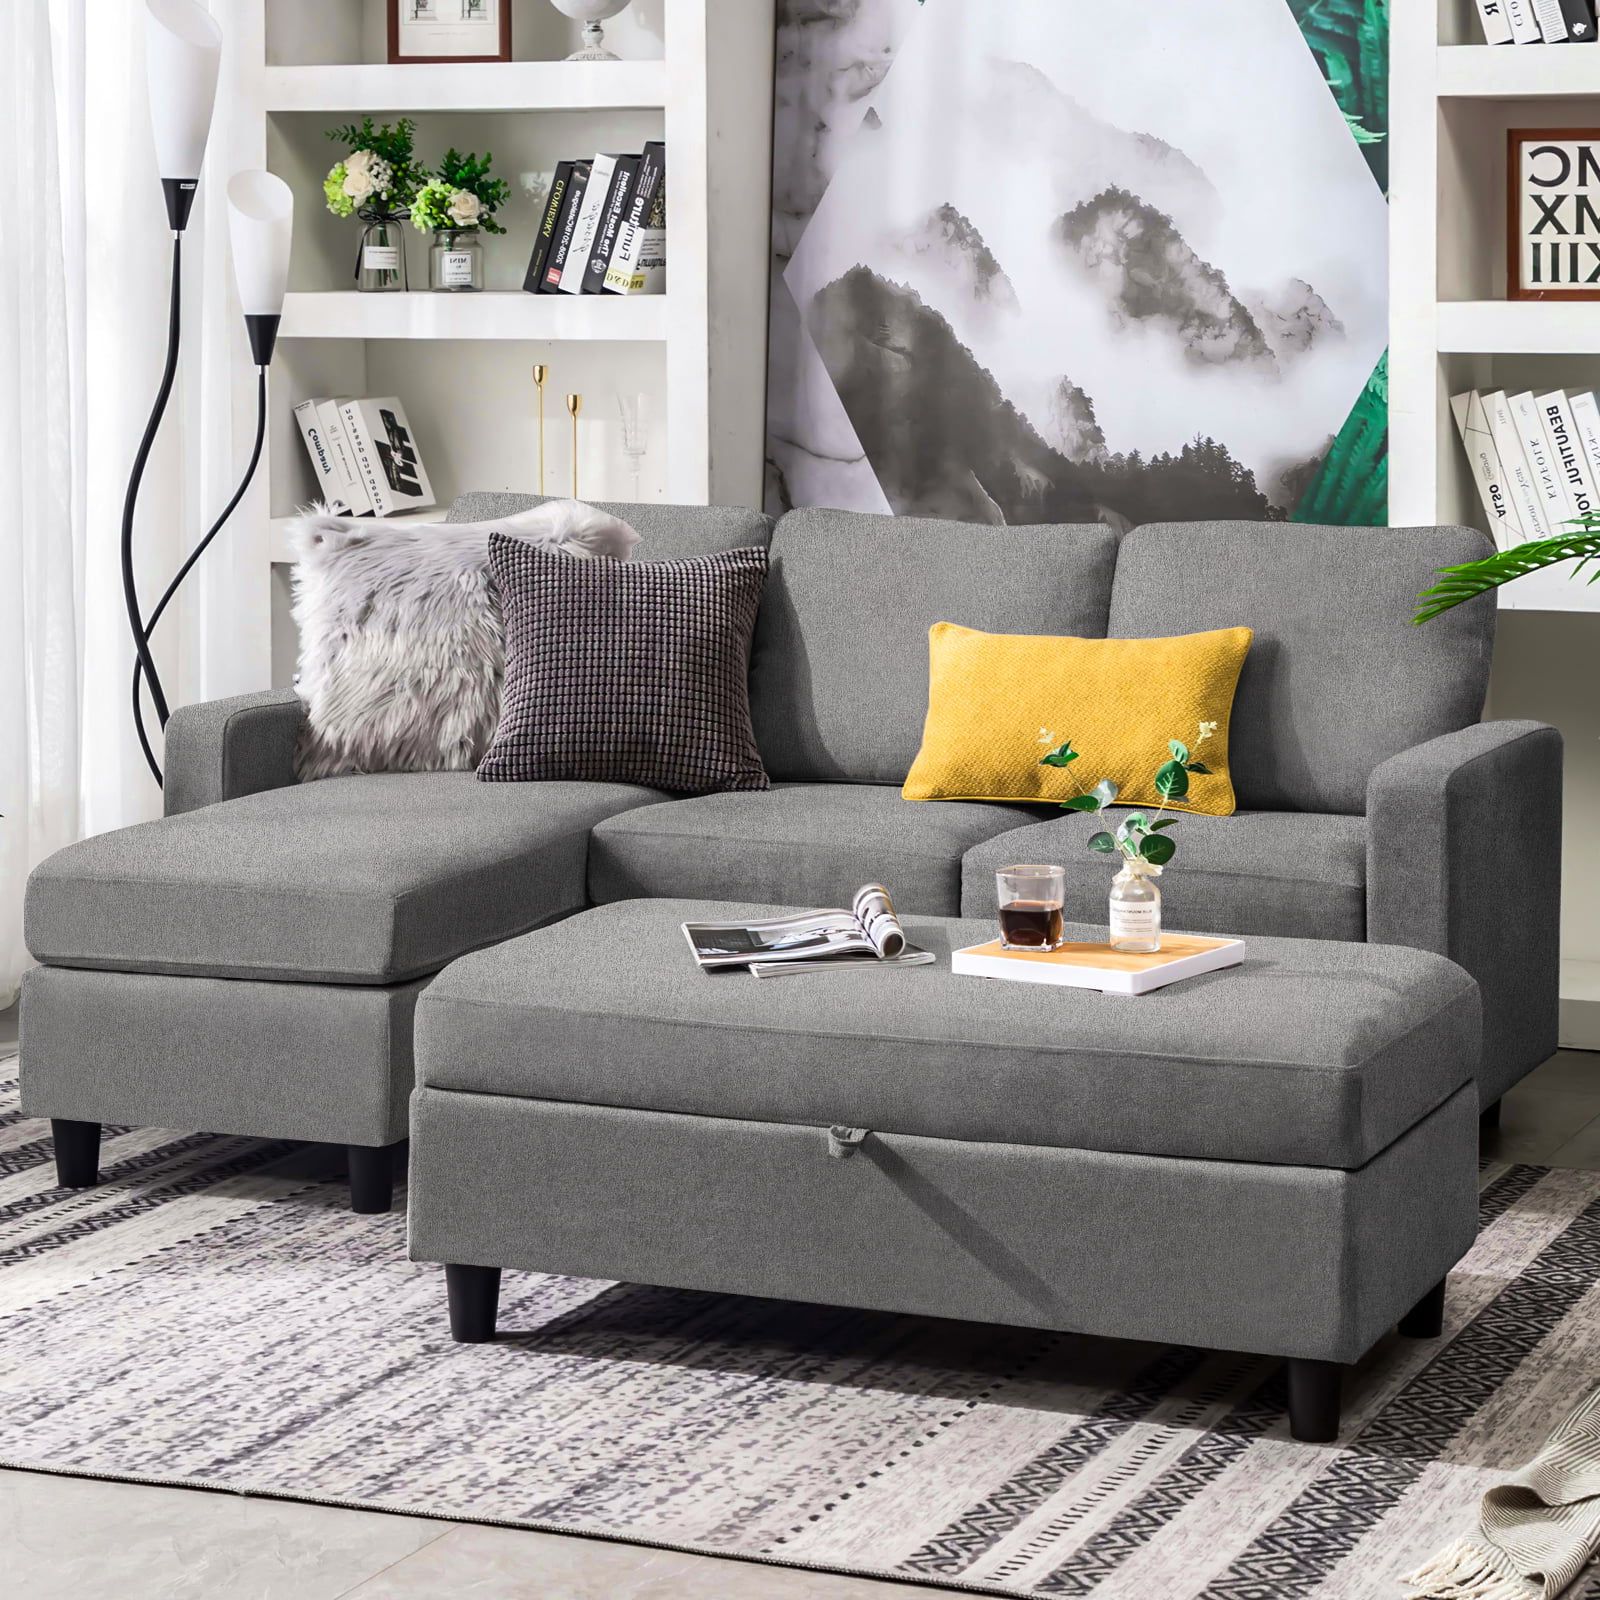 Honbay Convertible Sectional Sofa Set L Shaped Couch With Chaise & Ottoman  For Small Spaces, Grey Polyester – Walmart Intended For L Shapped Apartment Sofas (Gallery 3 of 20)